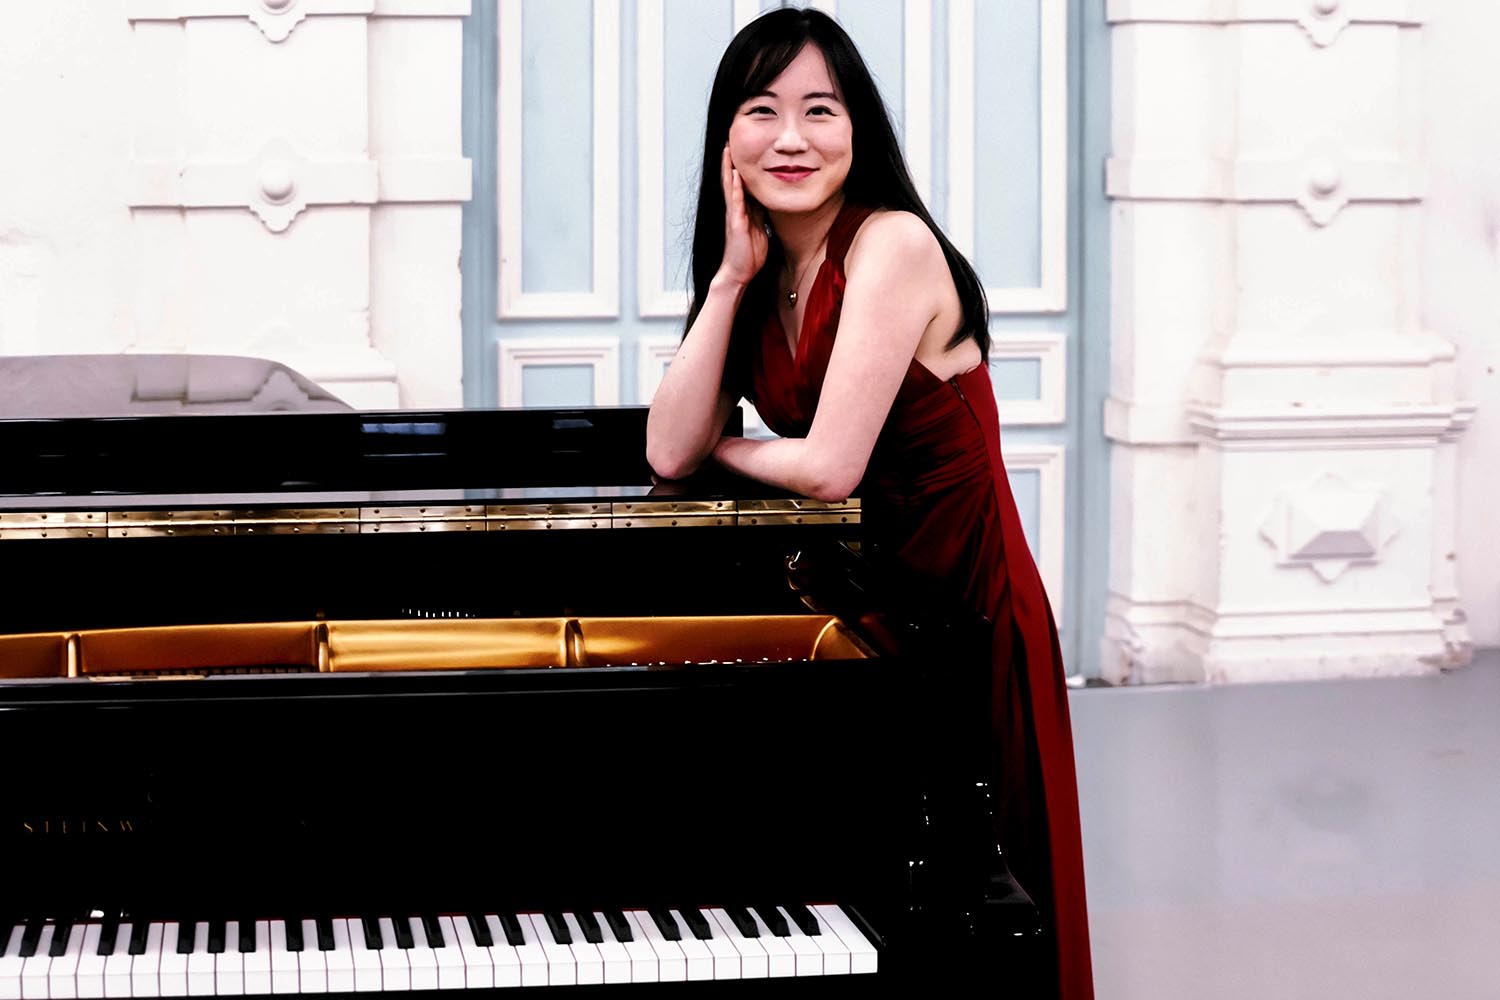 A woman wearing a dark red dress leans against a piano and smiles at the camera